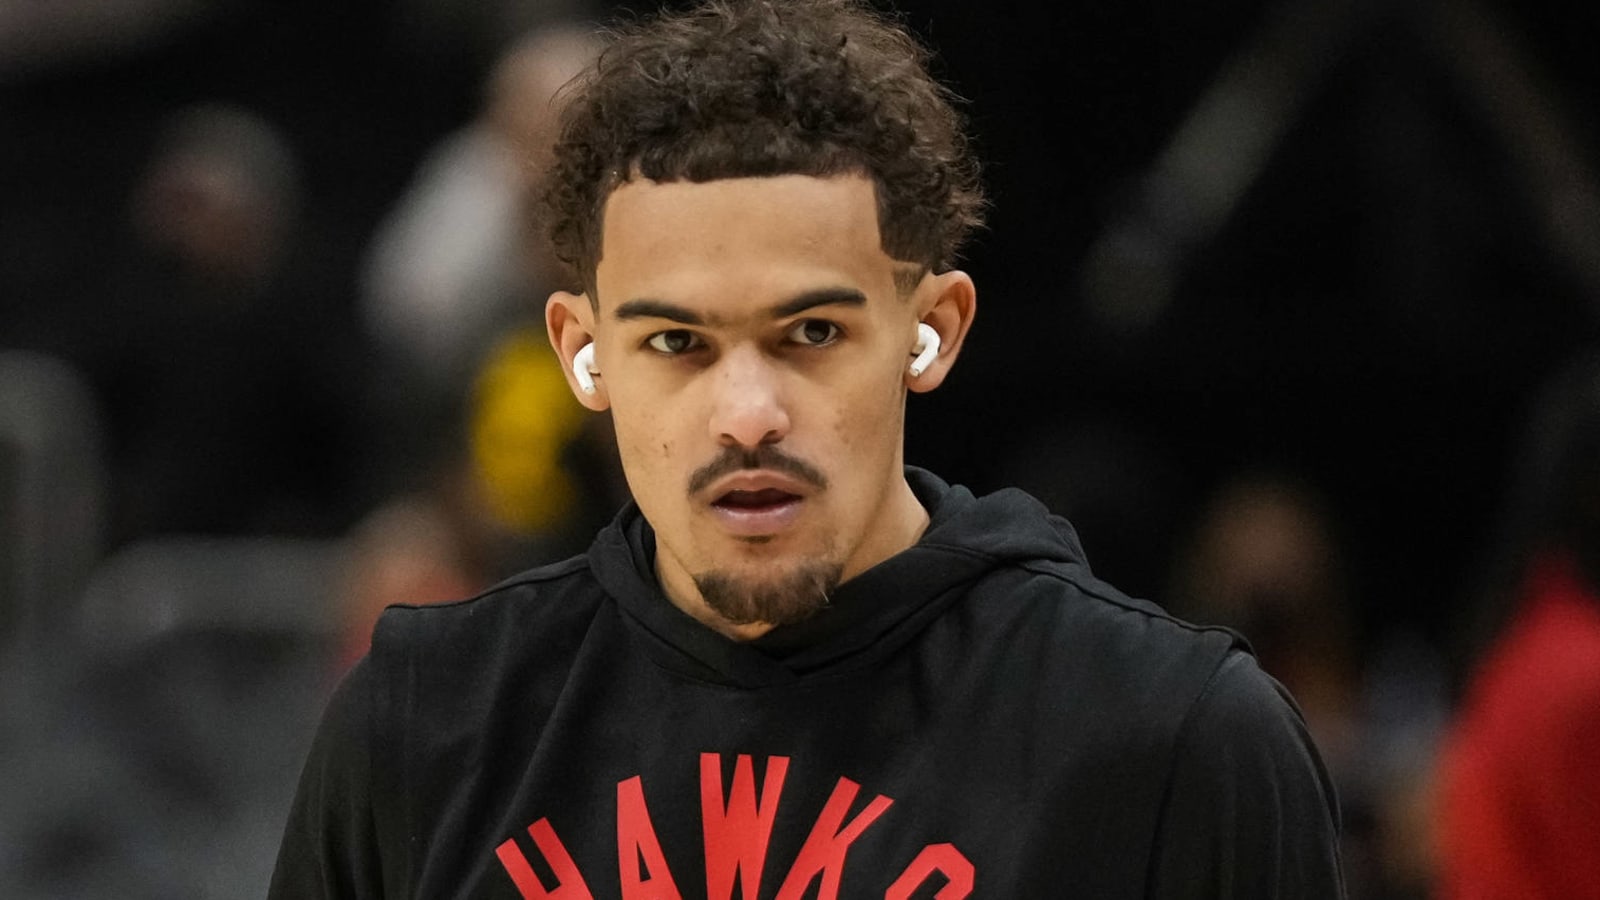 Watch: Trae Young may have had worst flop of NBA season